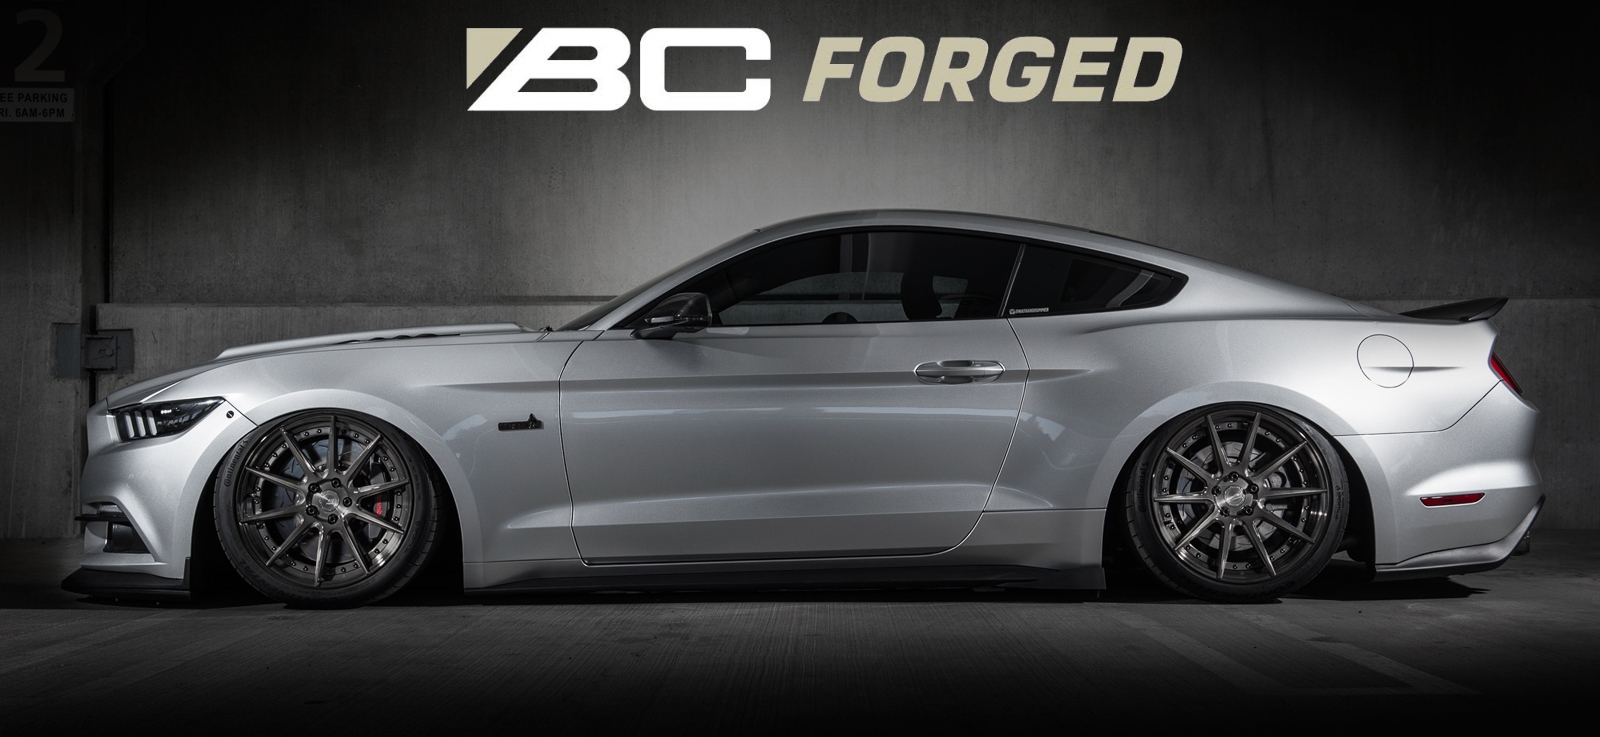 bc-forged_product_banner.jpg